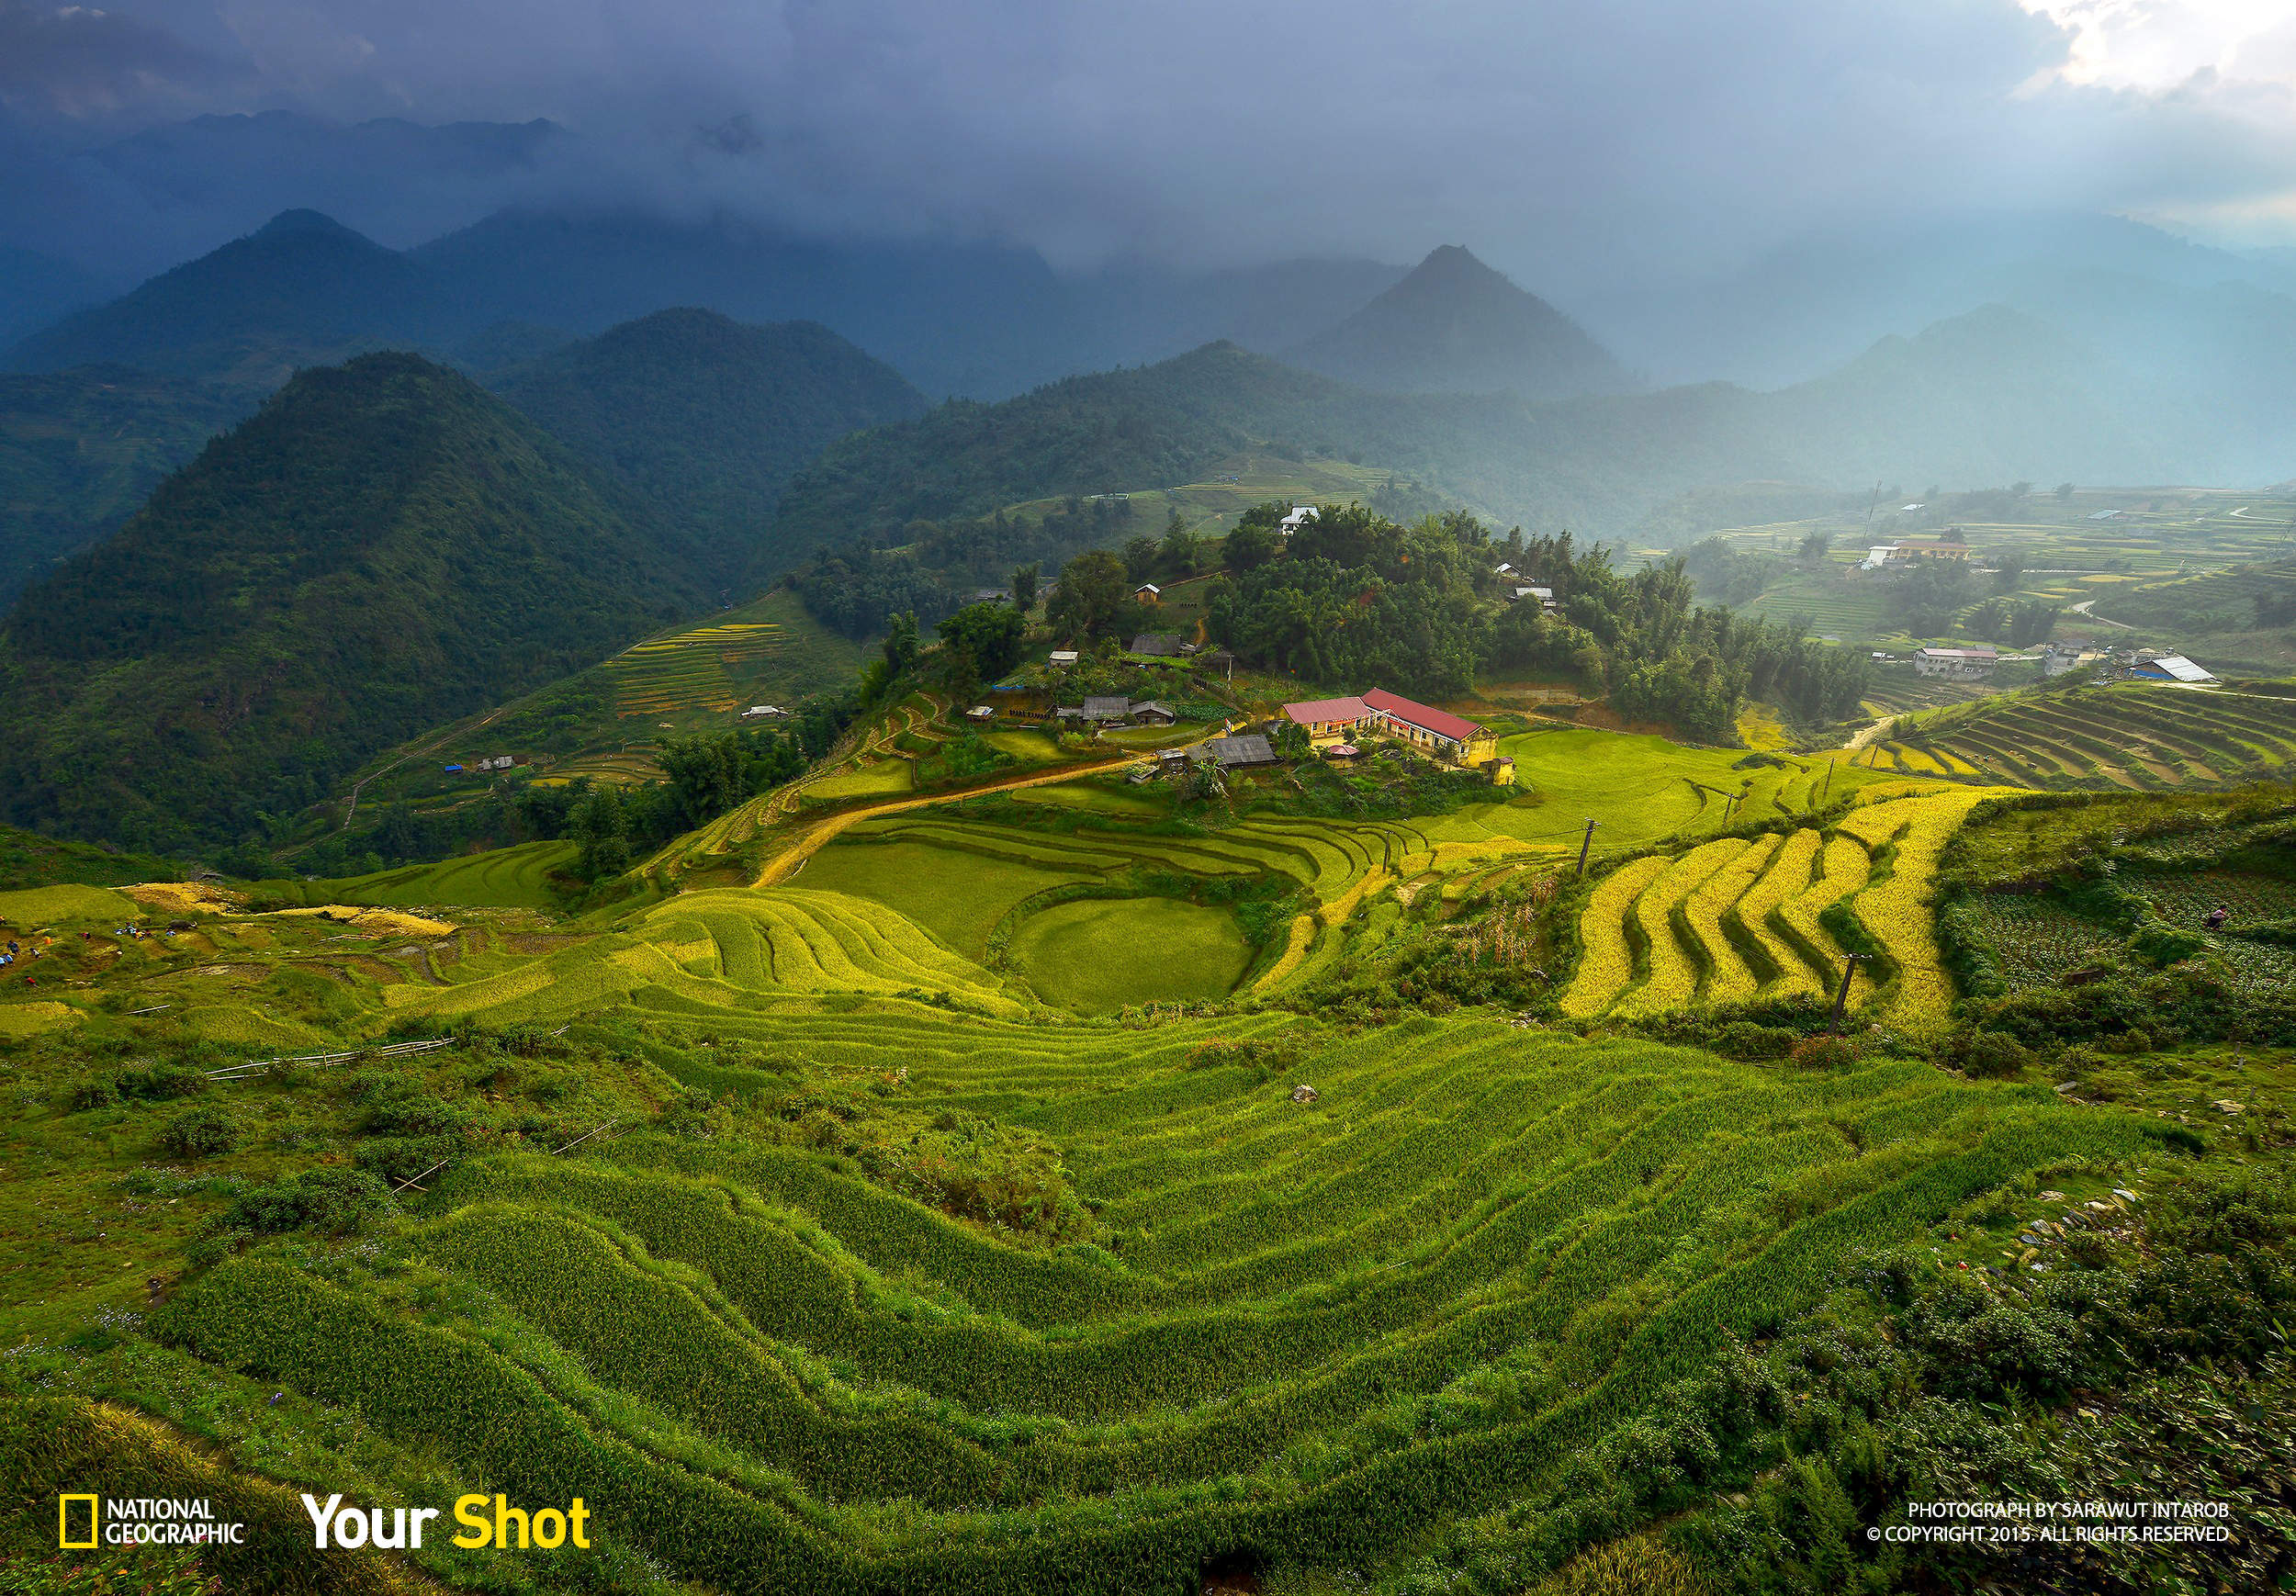 PHOTO: Submission entry for the National Geographic "Your Shot" Cover Photo Contest by Sarawut Intarob.